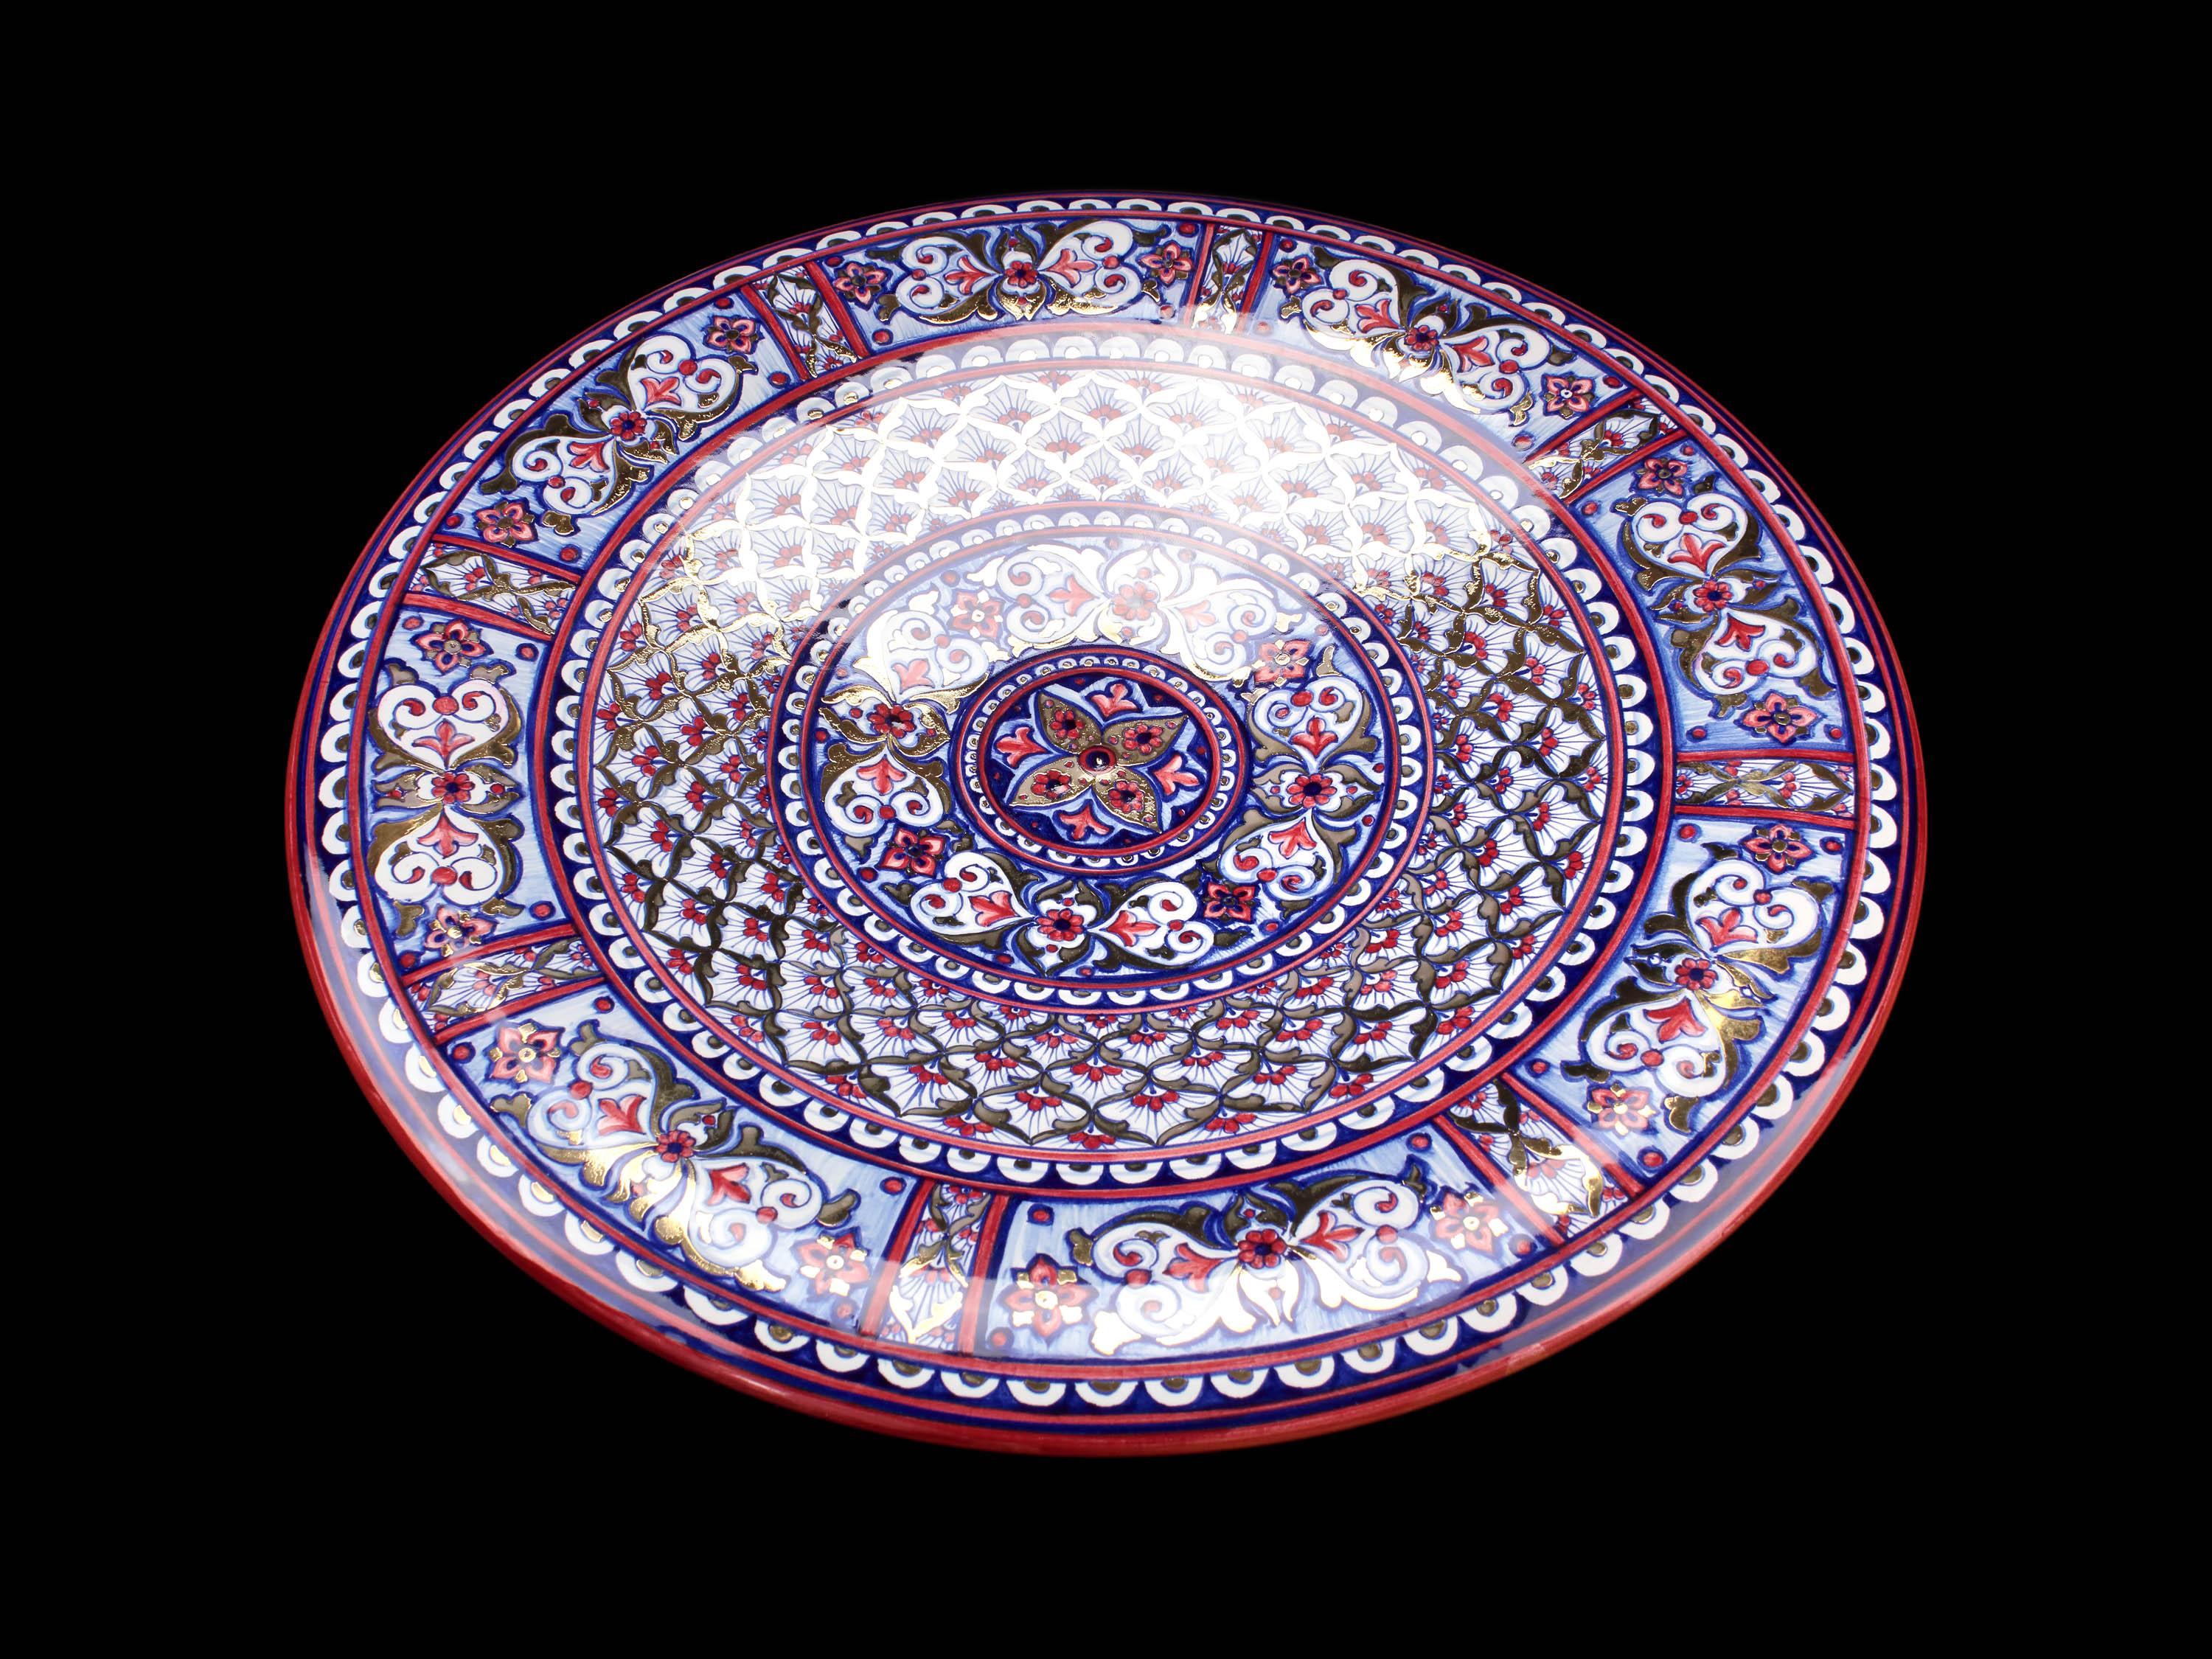 The dish, made of majolica painted in duotone of blue and red, features dense decoration, inspired by the Moorish style, throughout its surface. The outer band of the brim is richly embellished with spiral plant ornaments that are repeated in mirror